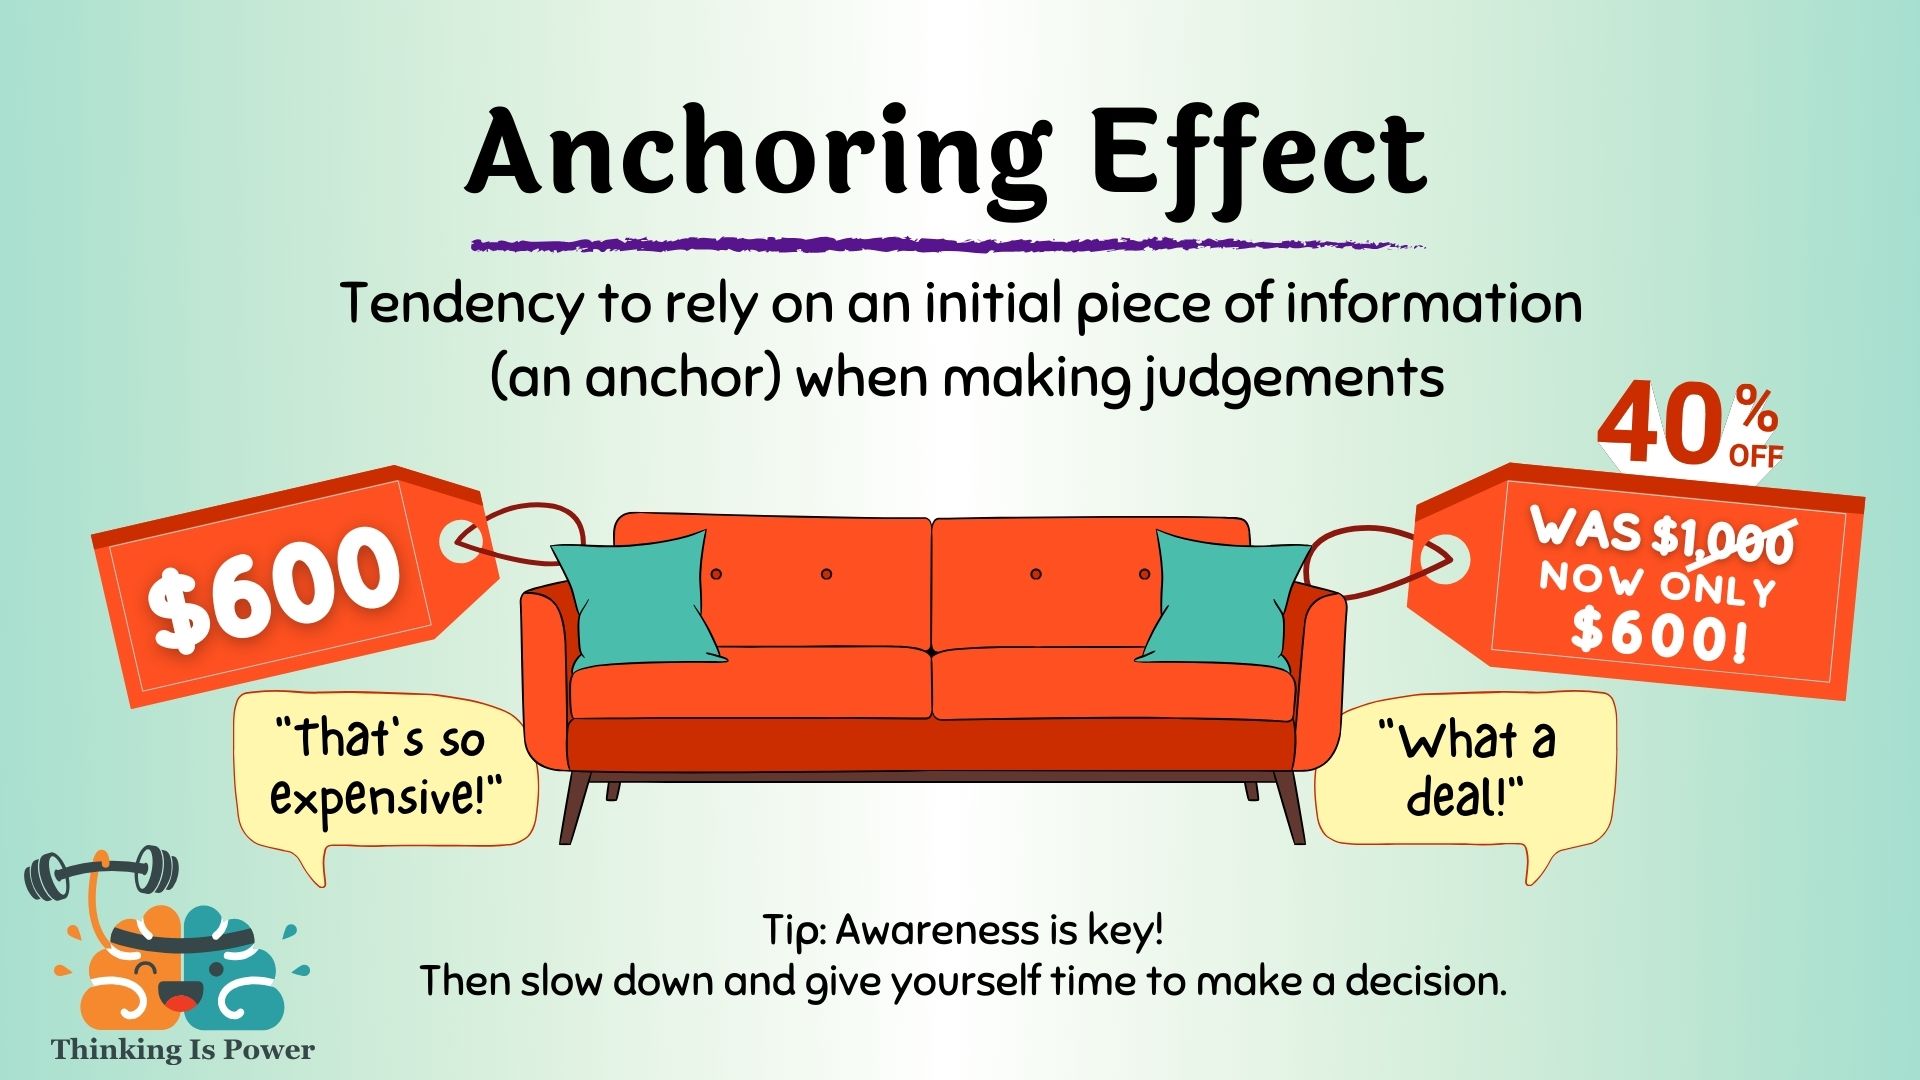 Anchoring effect or heuristic is the tendency to rely on an initial piece of information, or an anchor, when making judgements. Example is a sofa which is expensive at $600 but a deal at 40% off $1000. Tip: Awareness is key! Then slow down and give yourself time to make a decision.